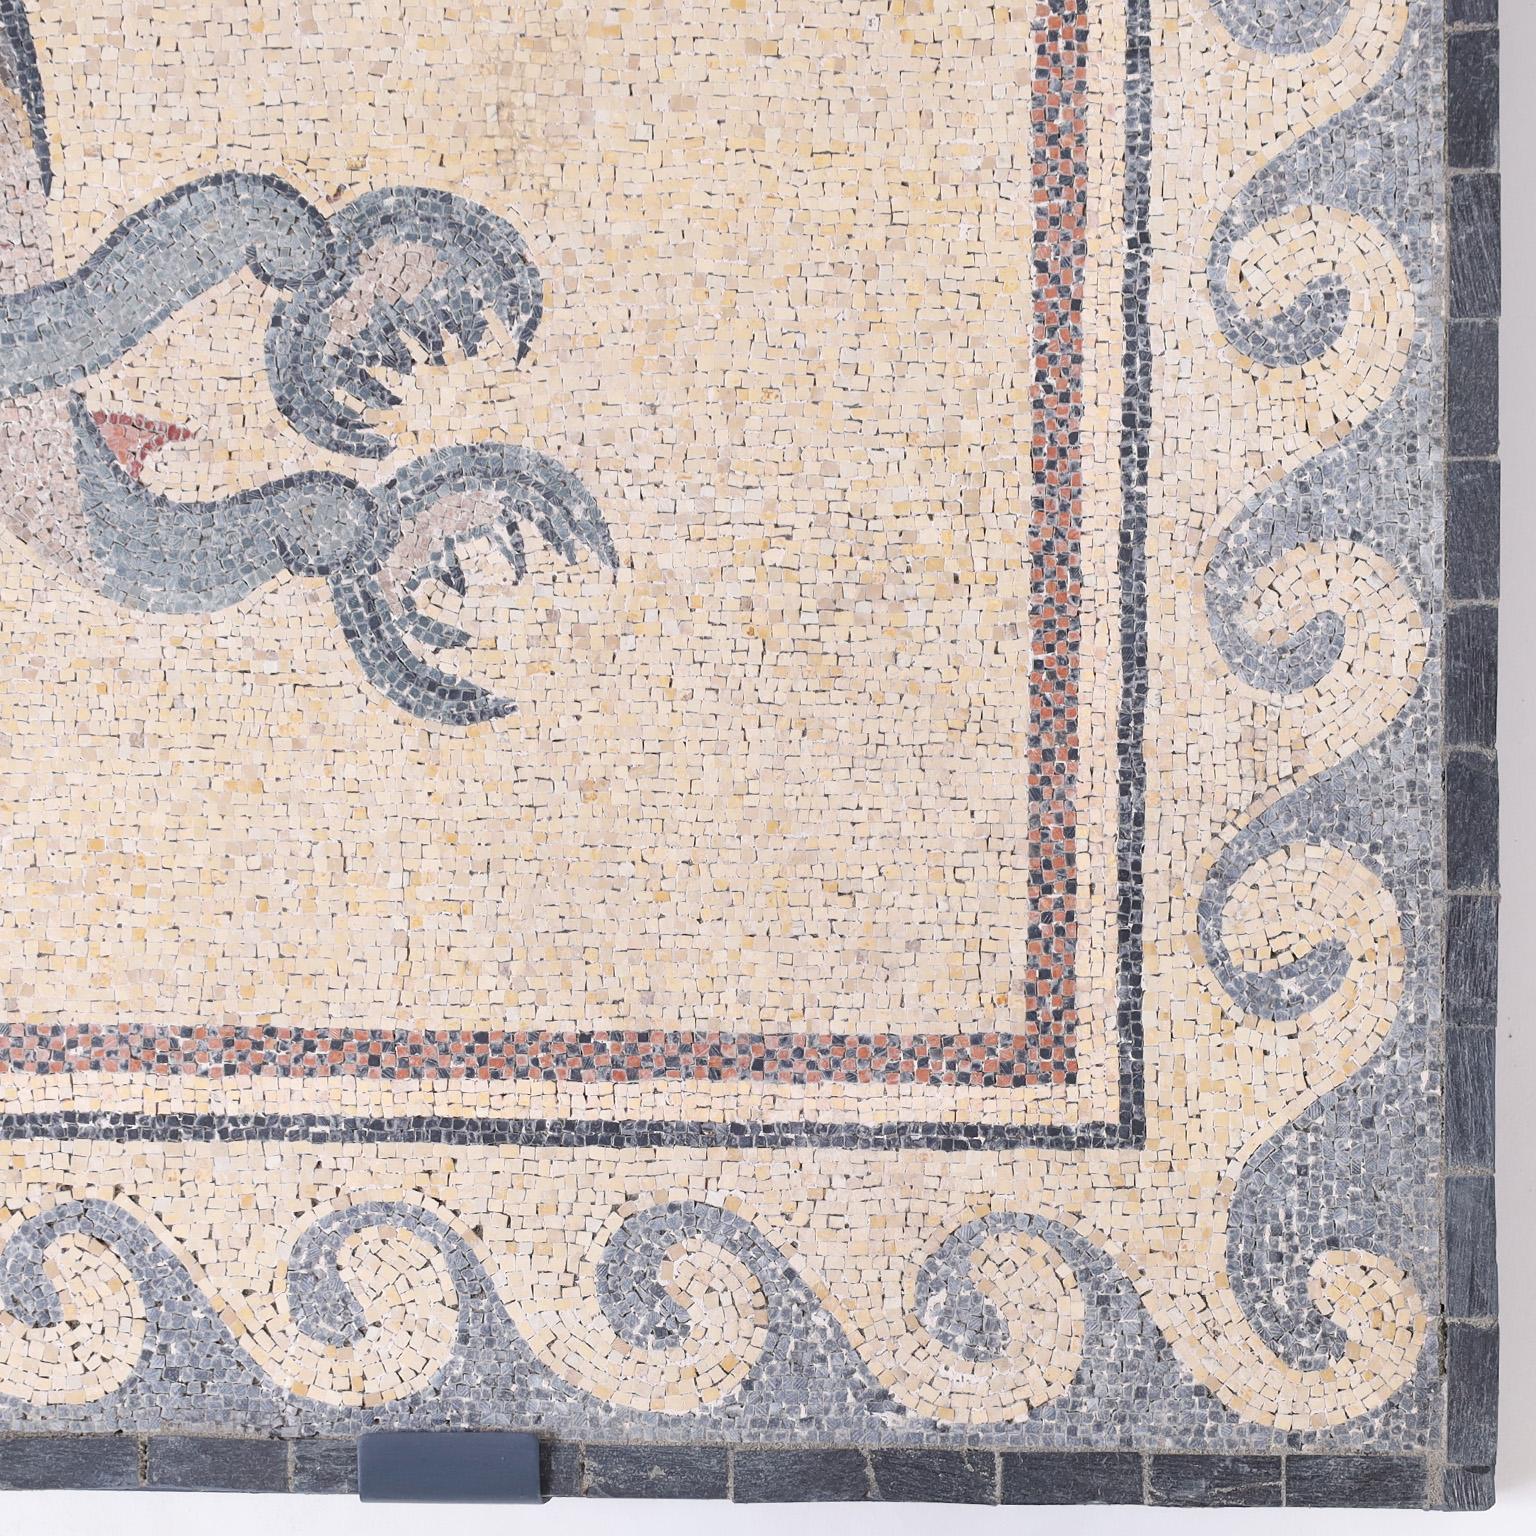 Italian Micro Mosaic Plaque of Eros Riding Two Dolphins